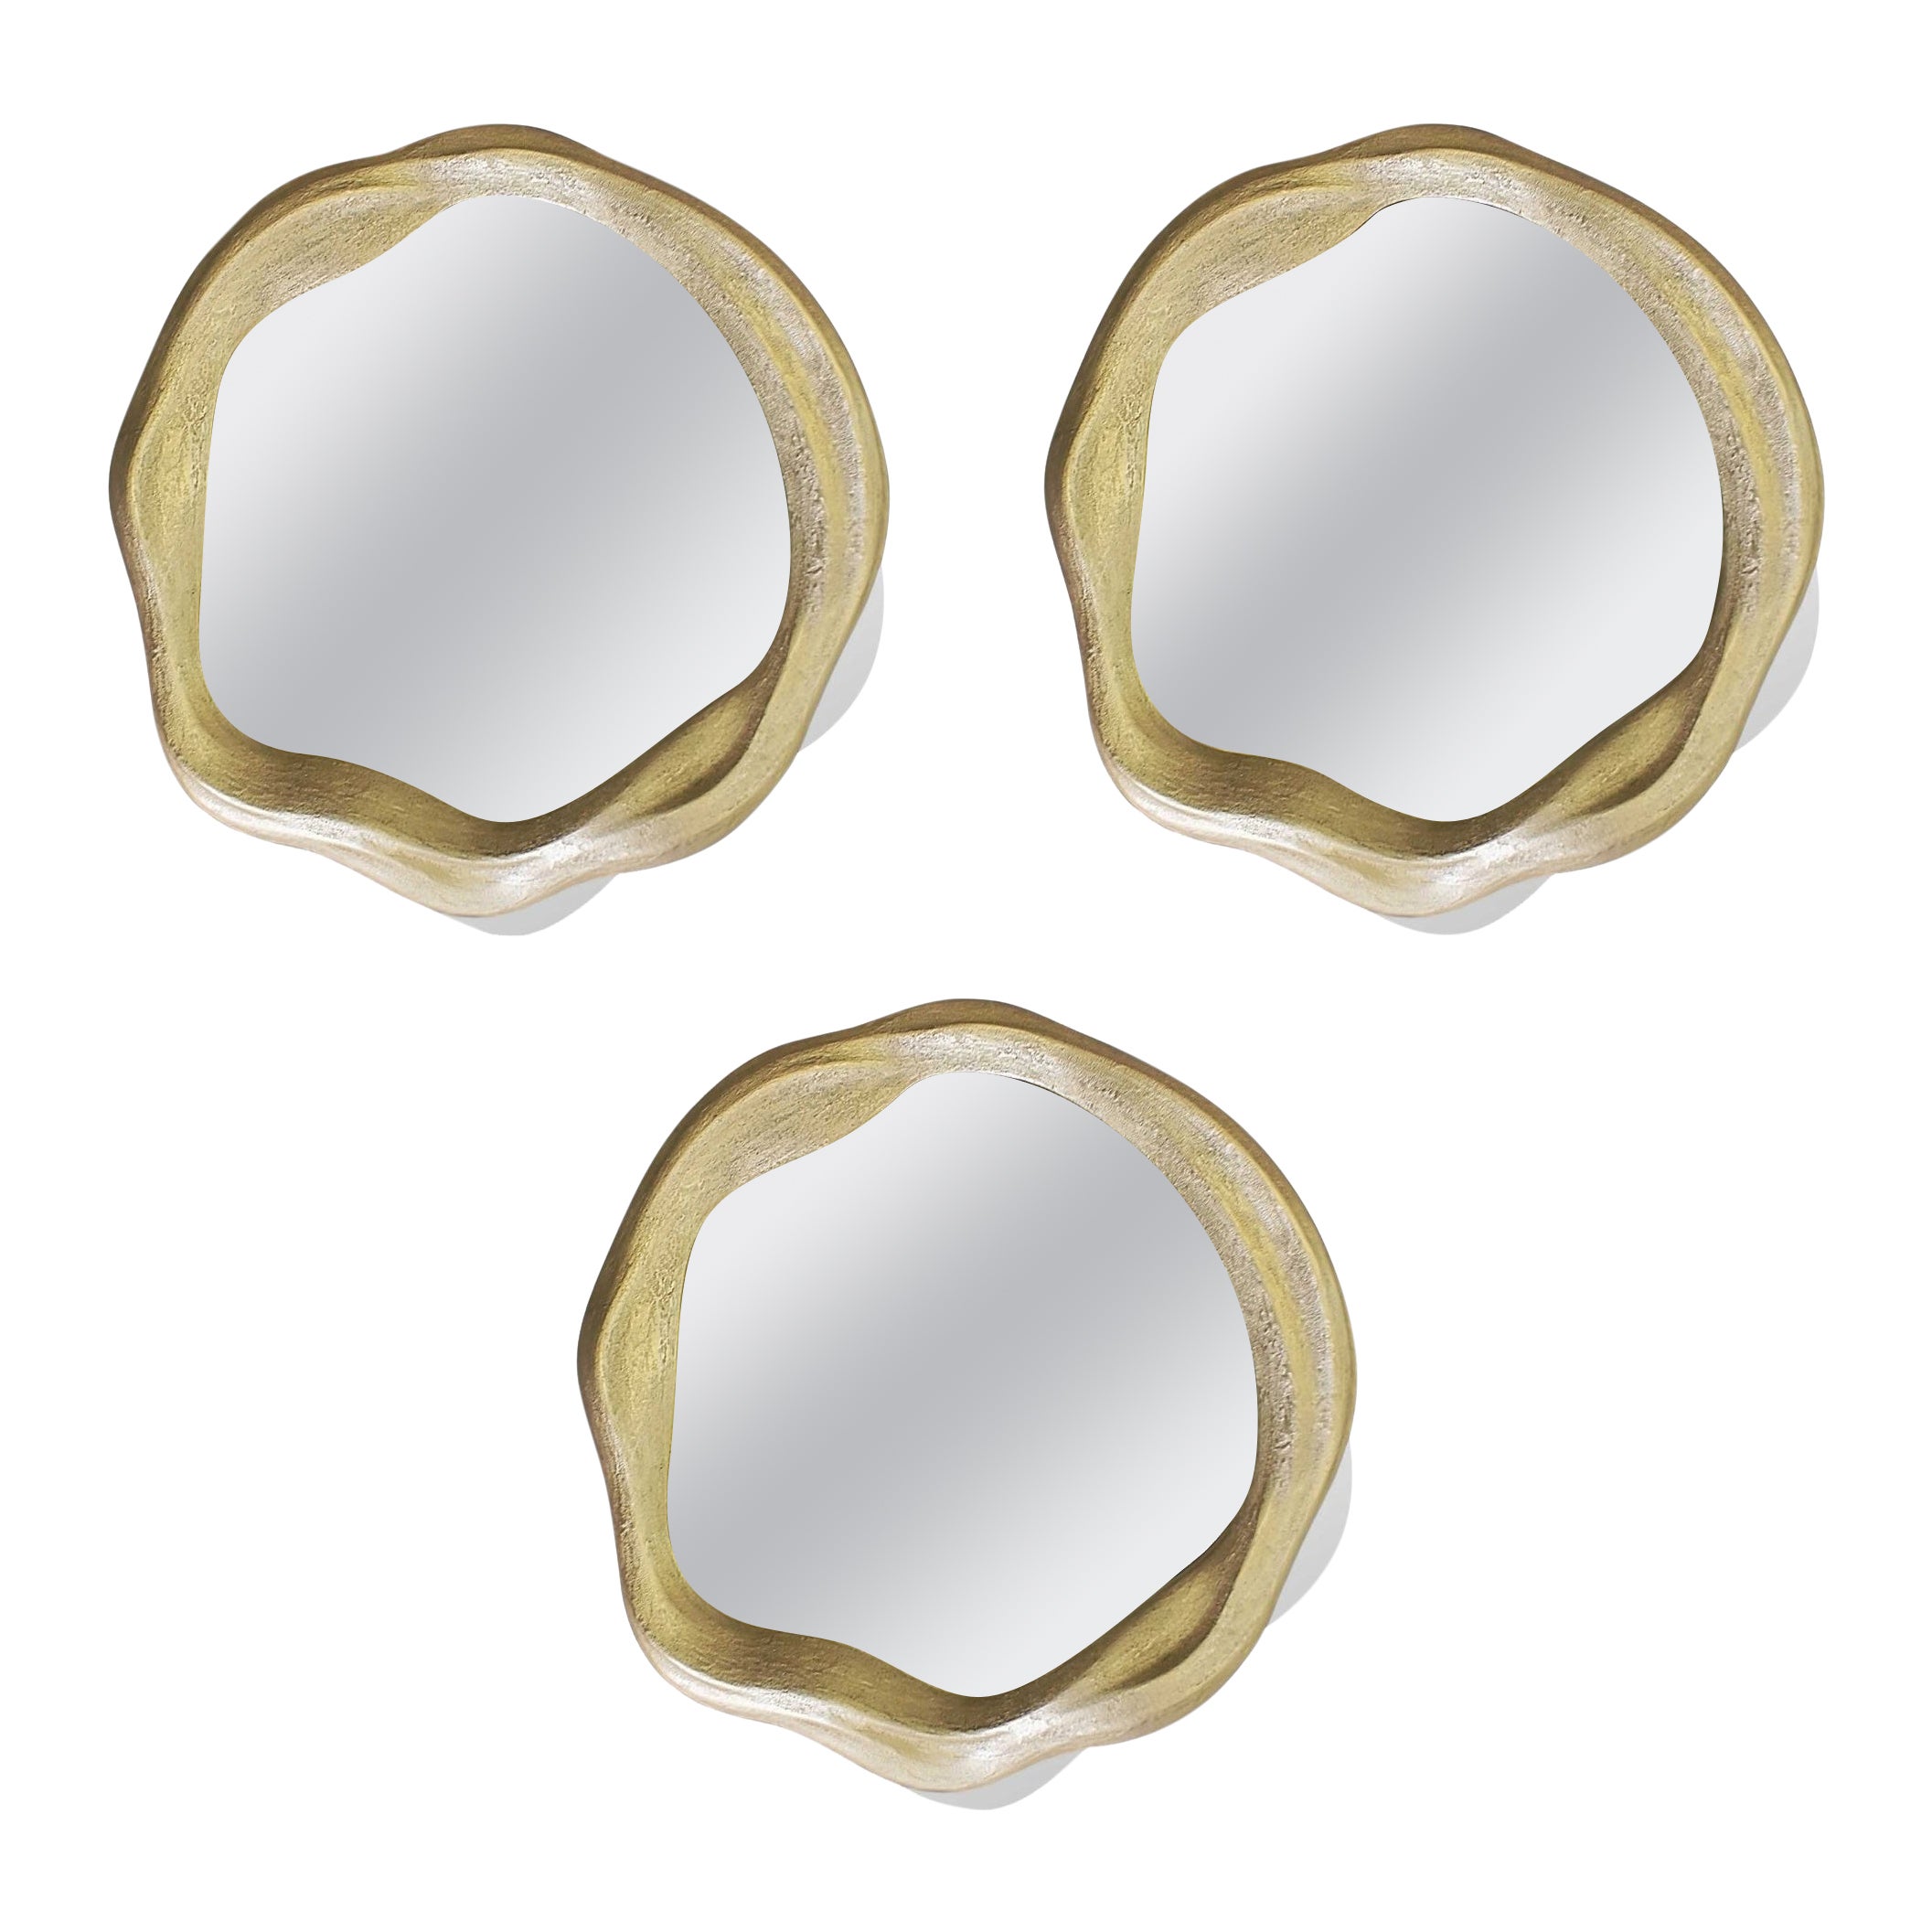 New Set of 3 Mirrors in Resin and Fiberglass Lacquered Color Gold For Sale